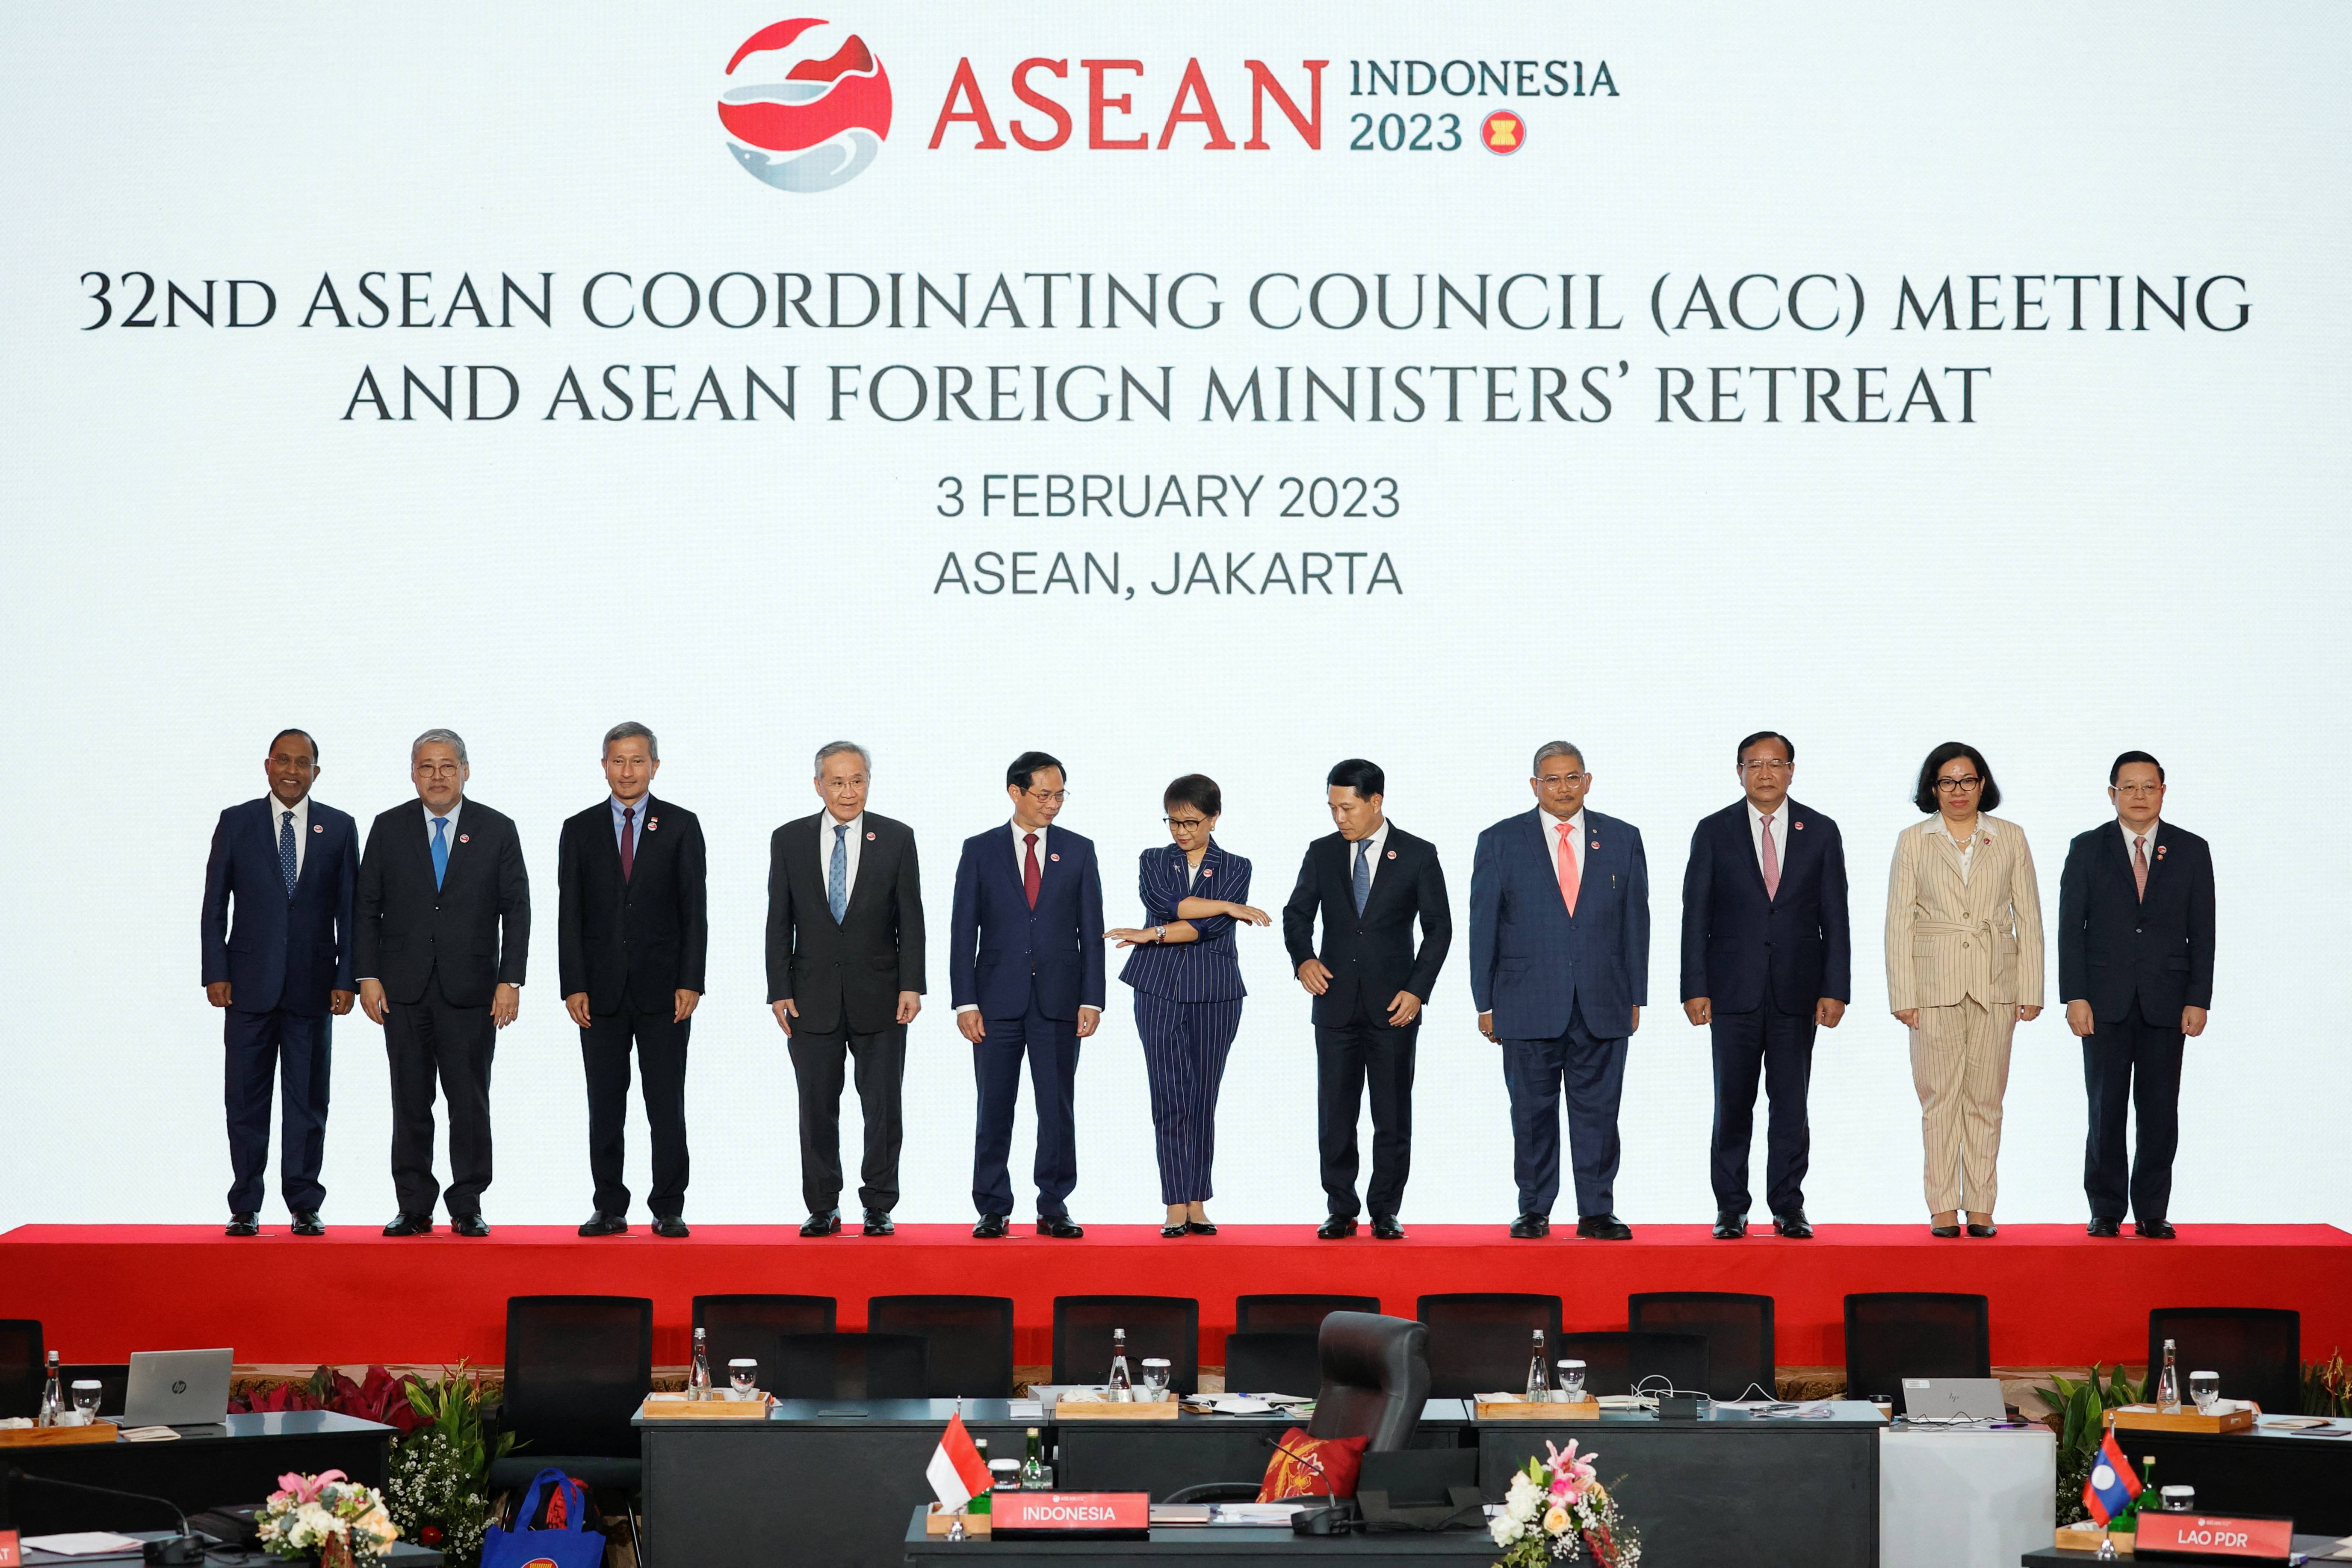 ASEAN Coordinating Council (ACC) meeting in Jakarta